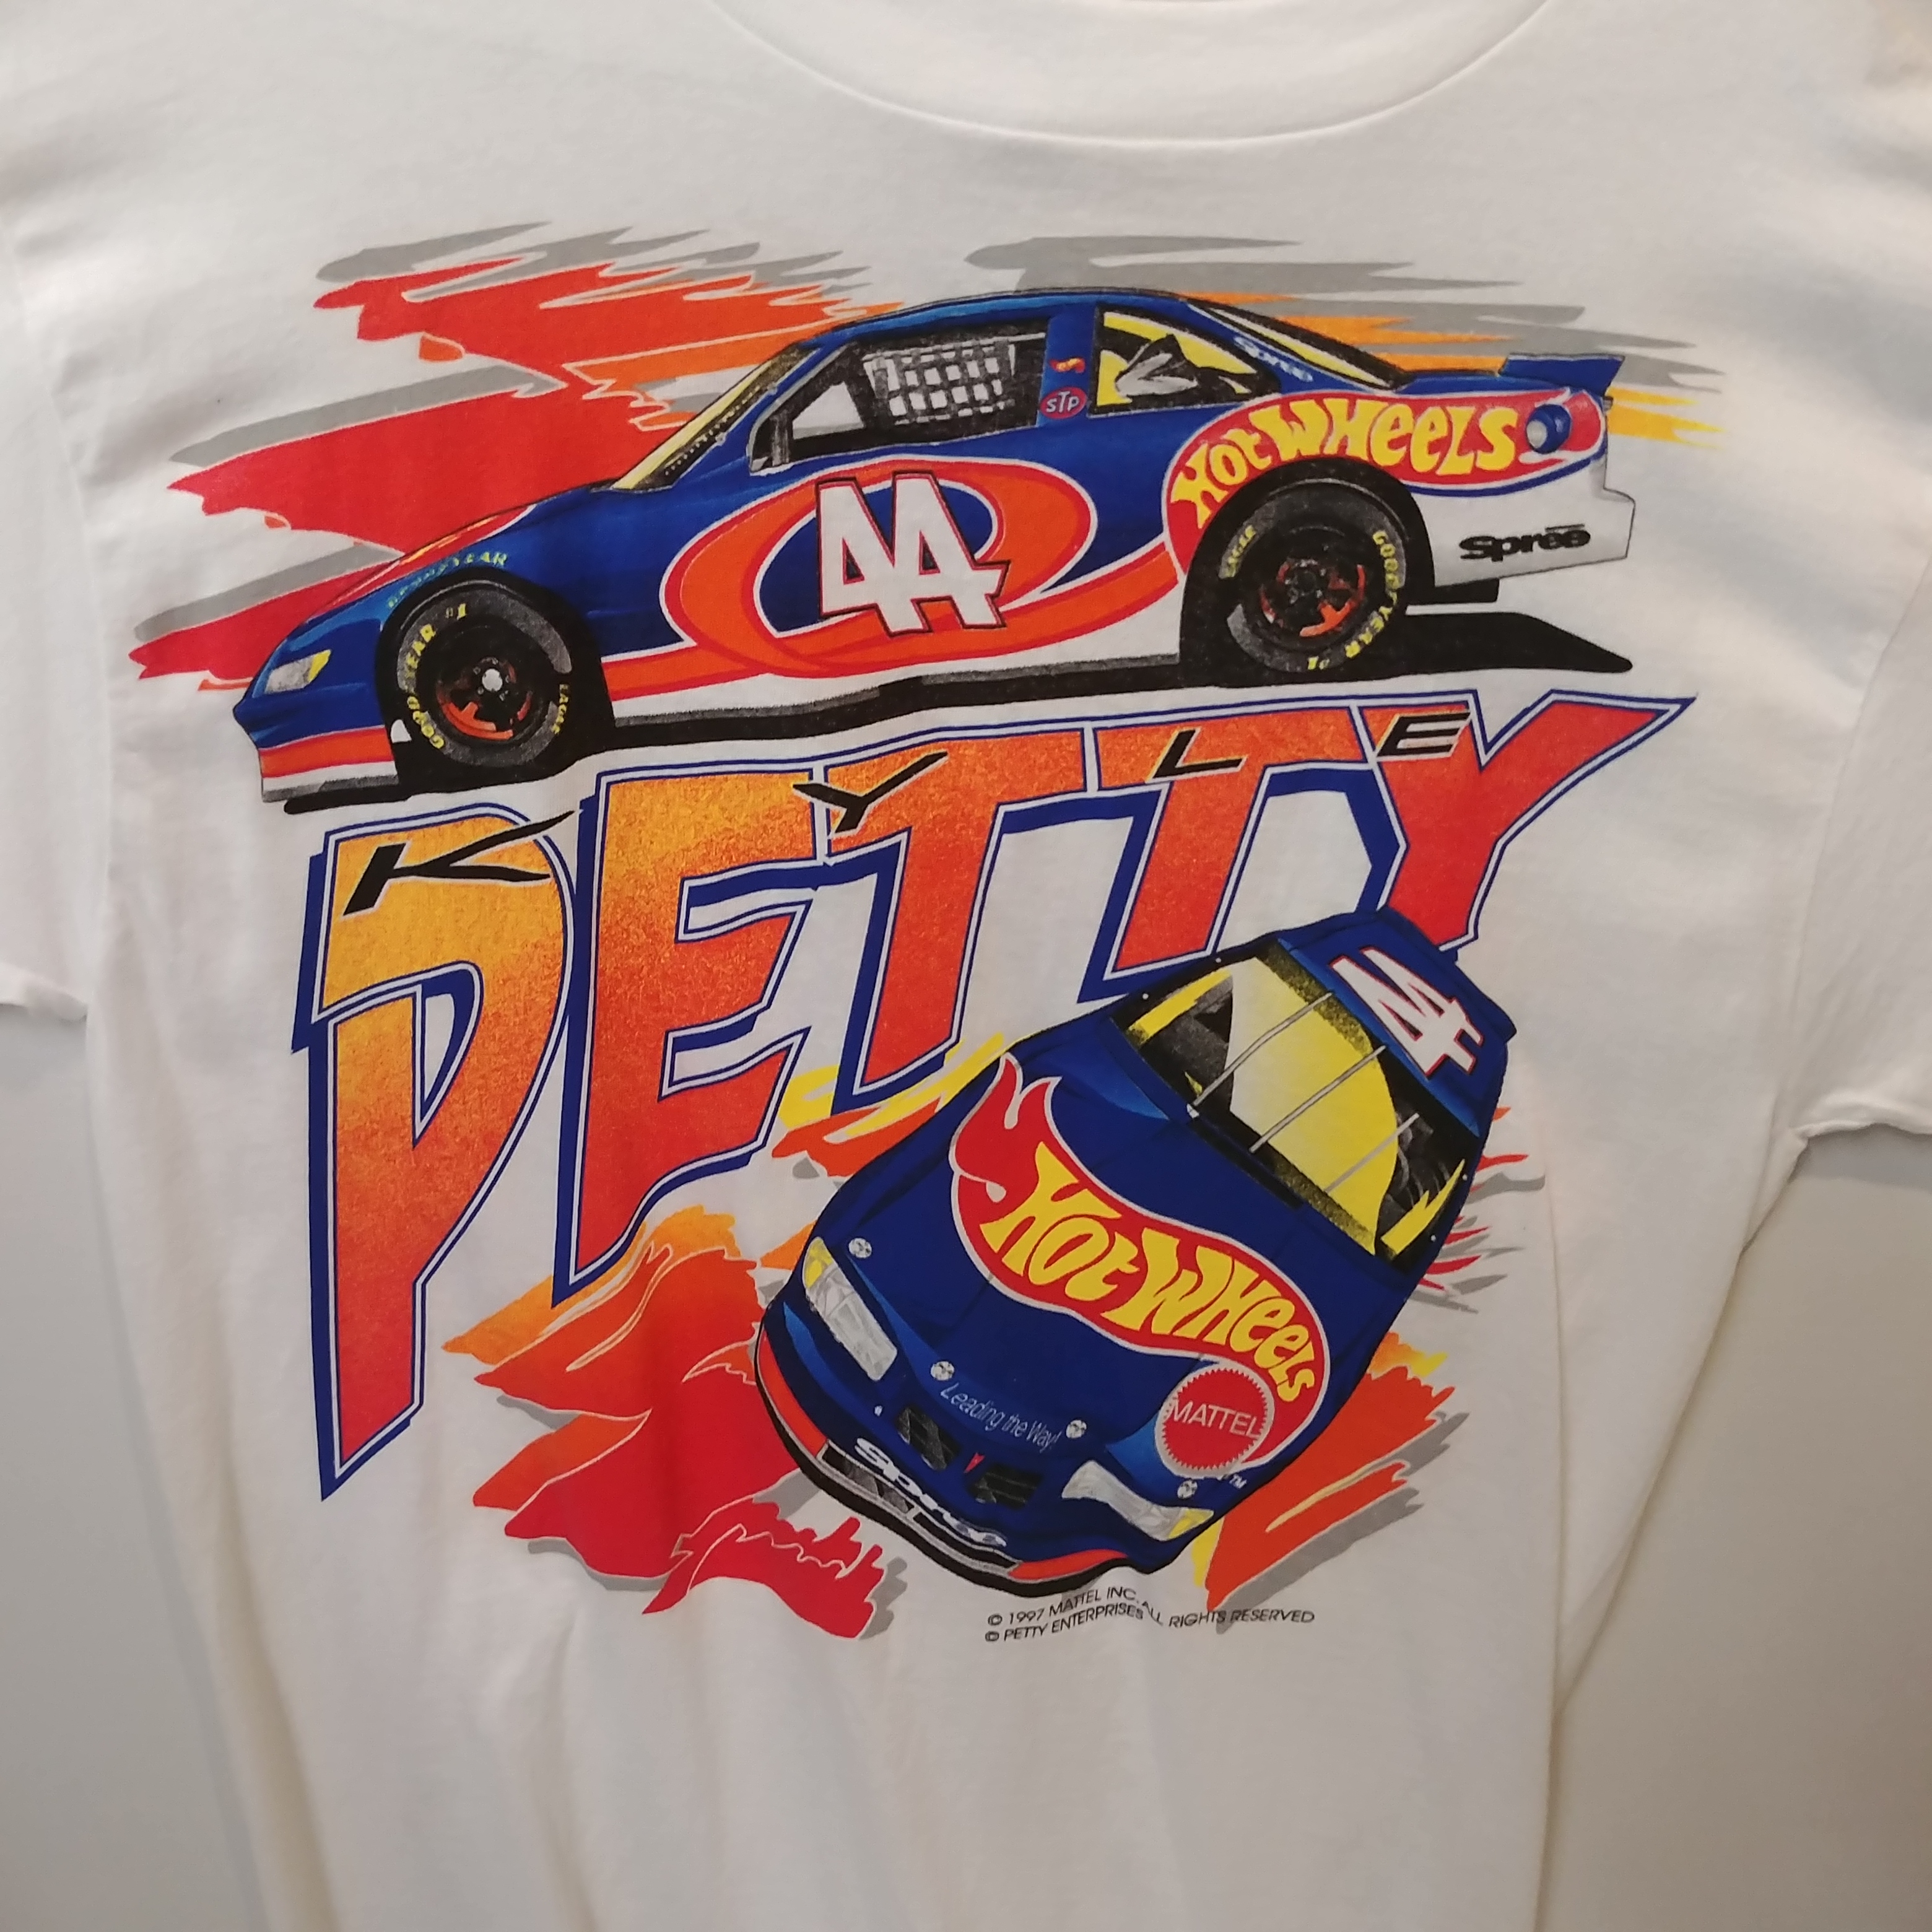 1997 Kyle Petty Hot Wheels "Hunger To Win" tee